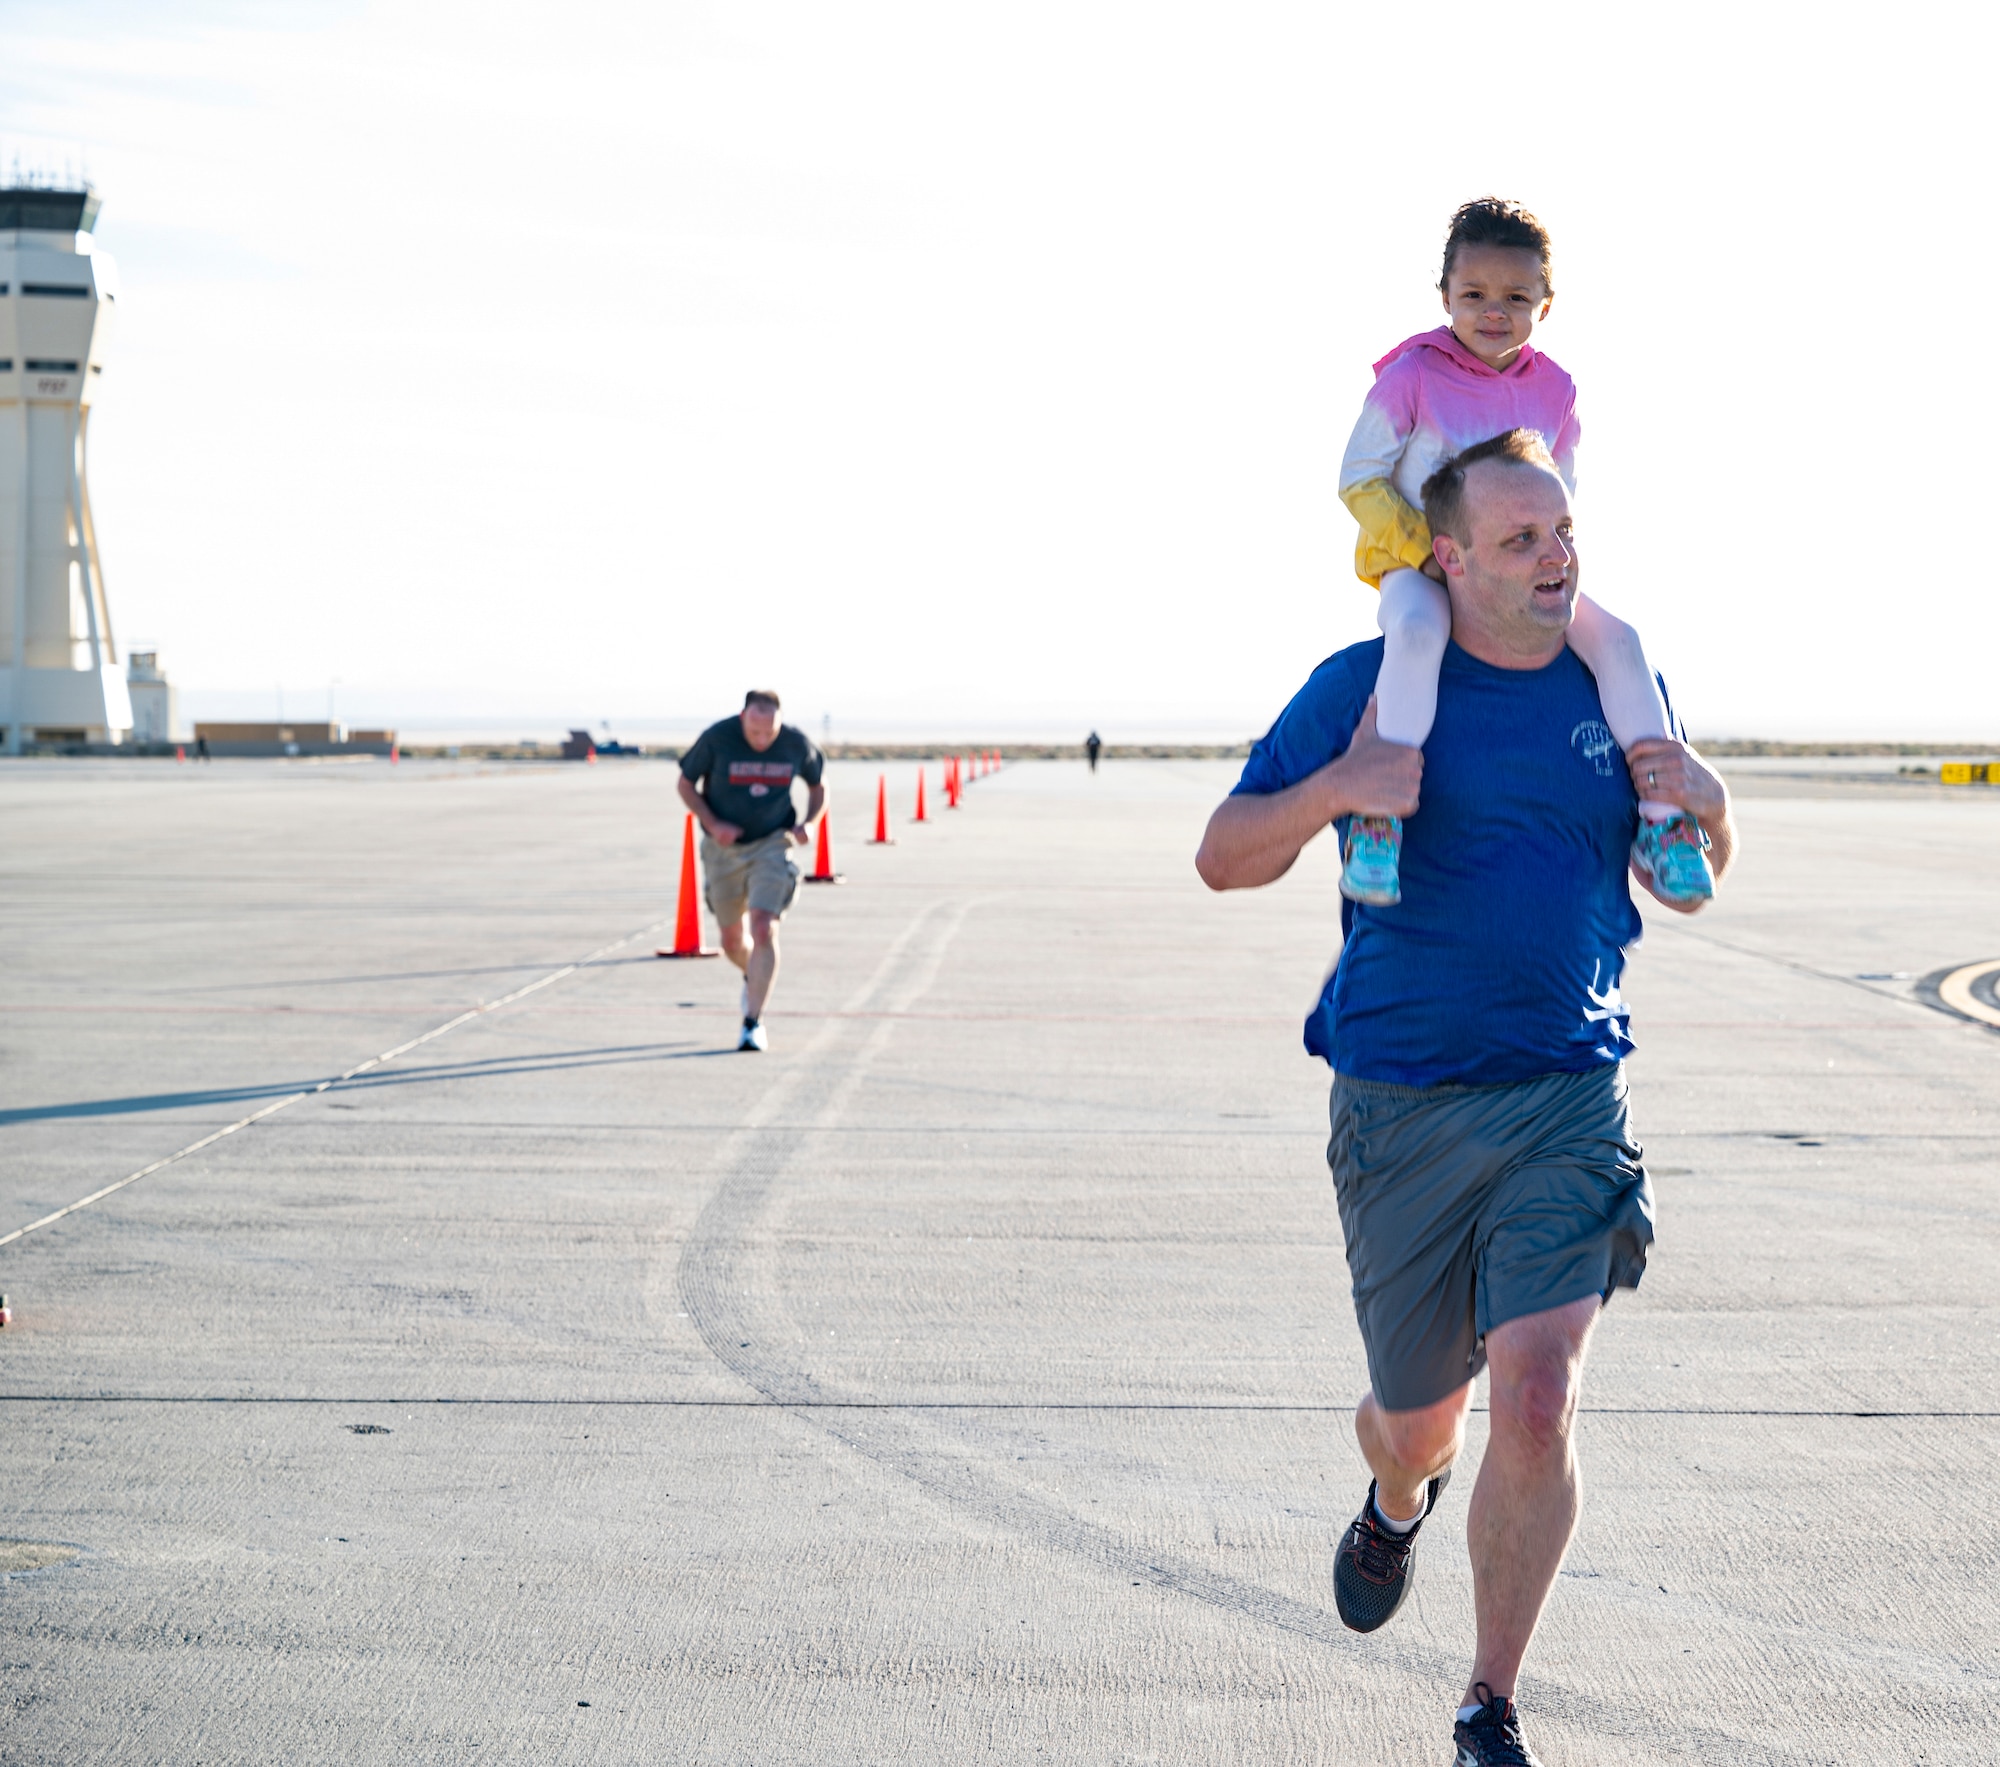 Edwards Air Force Base shows their support for military children everywhere by hosting the 2022 Month of the Military Child 5K/10K.